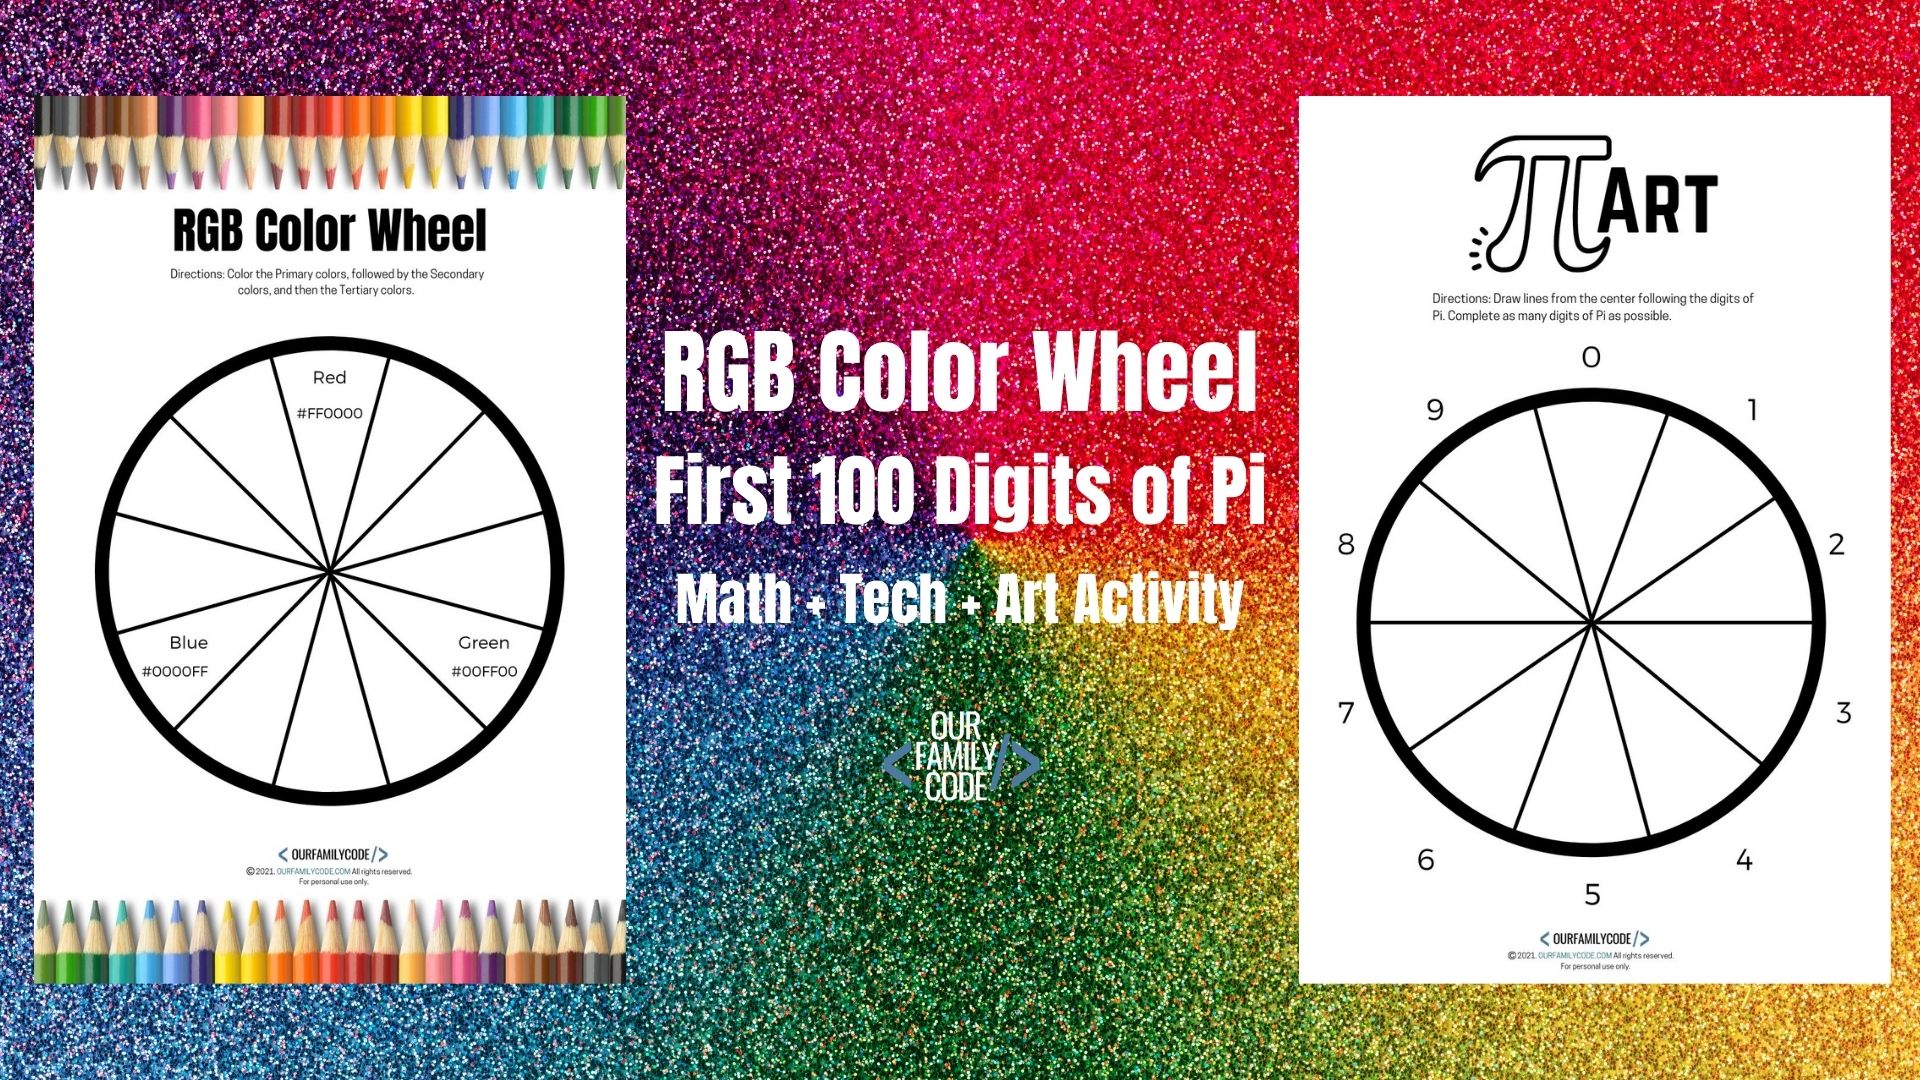 A picture of two math worksheets on a color wheel background to learn about rgb color wheels and the first 100 digits of pi.